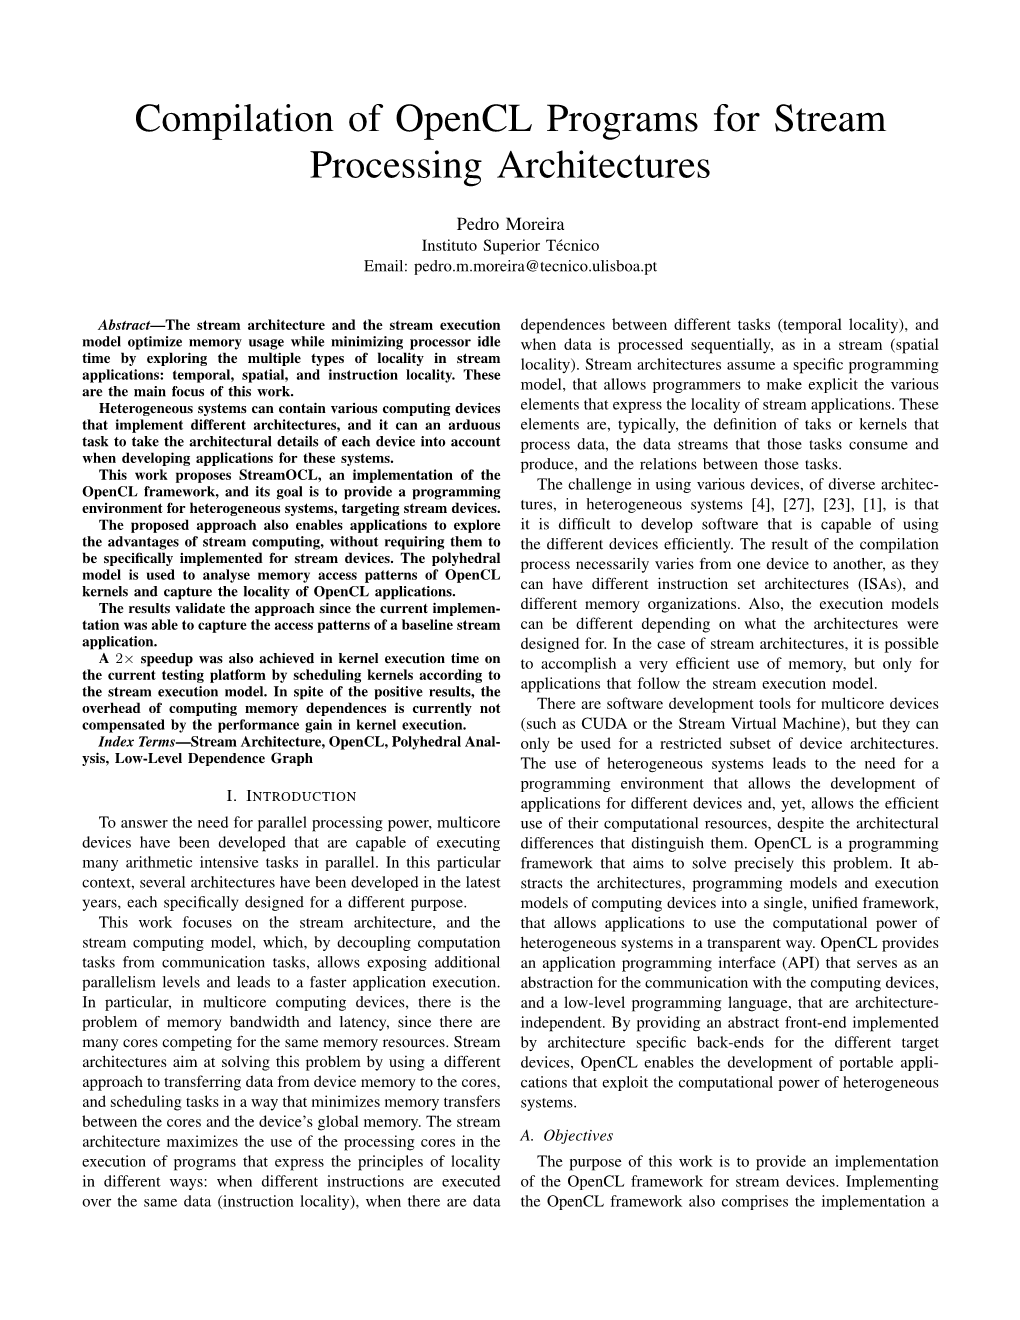 Compilation of Opencl Programs for Stream Processing Architectures